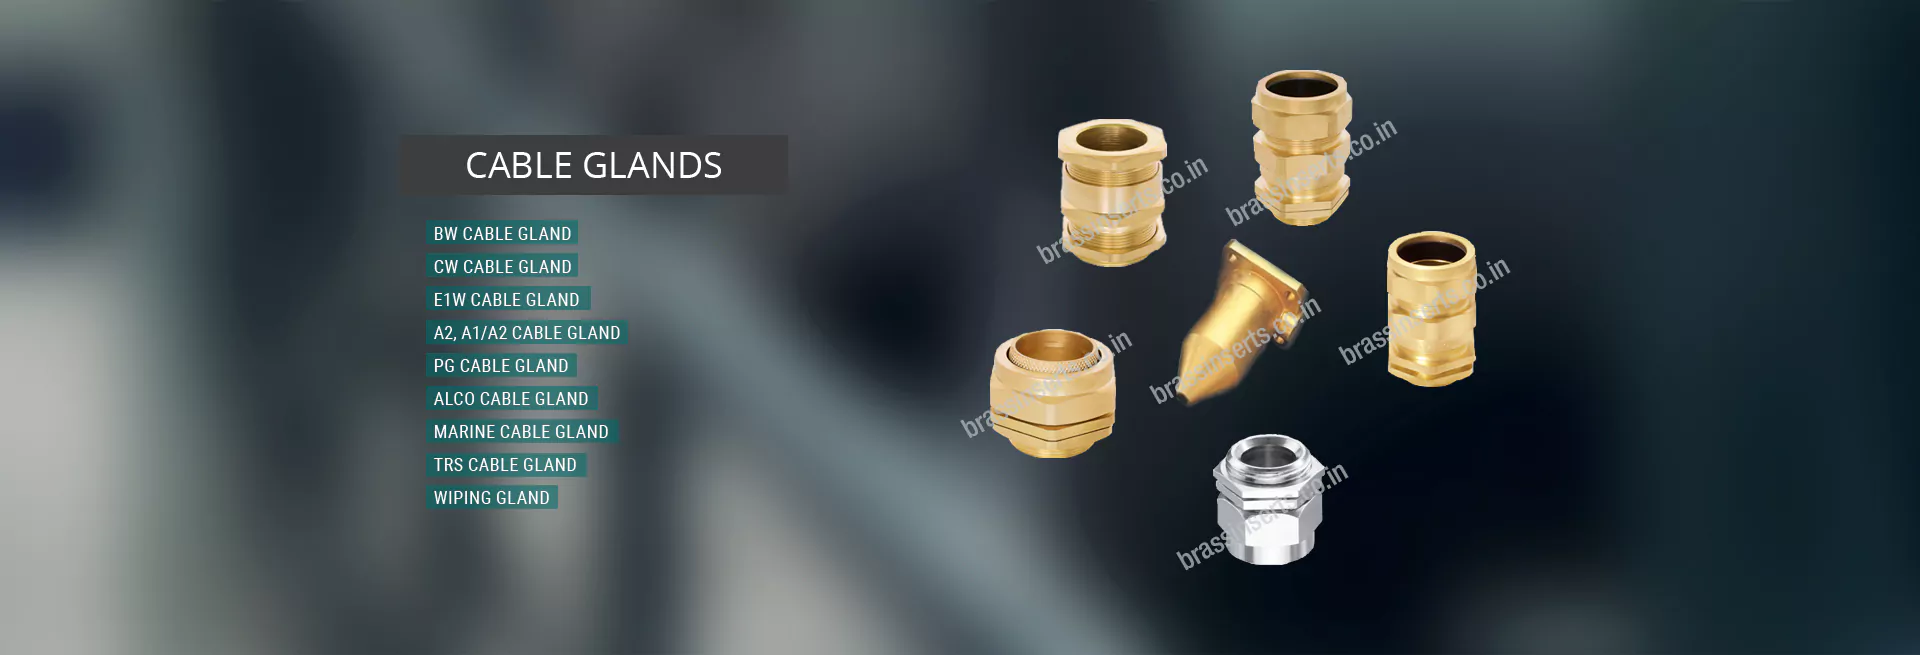 Cable Glands India